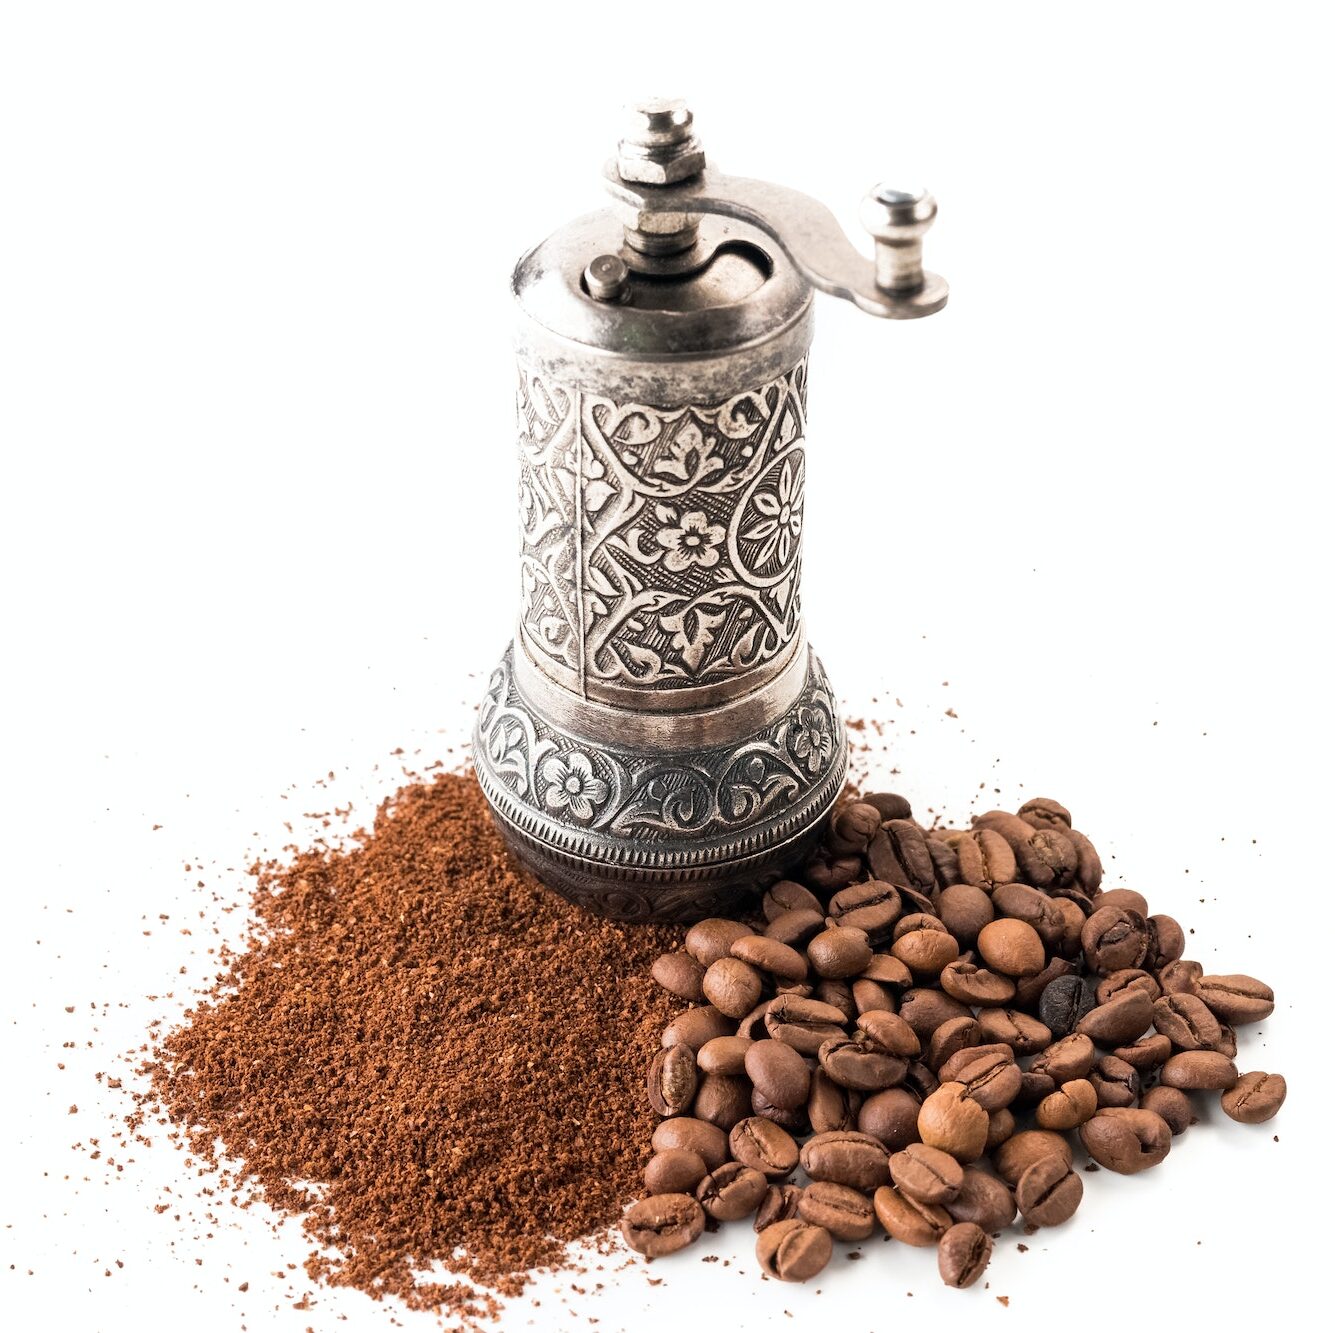 Coffee and grinder on white background